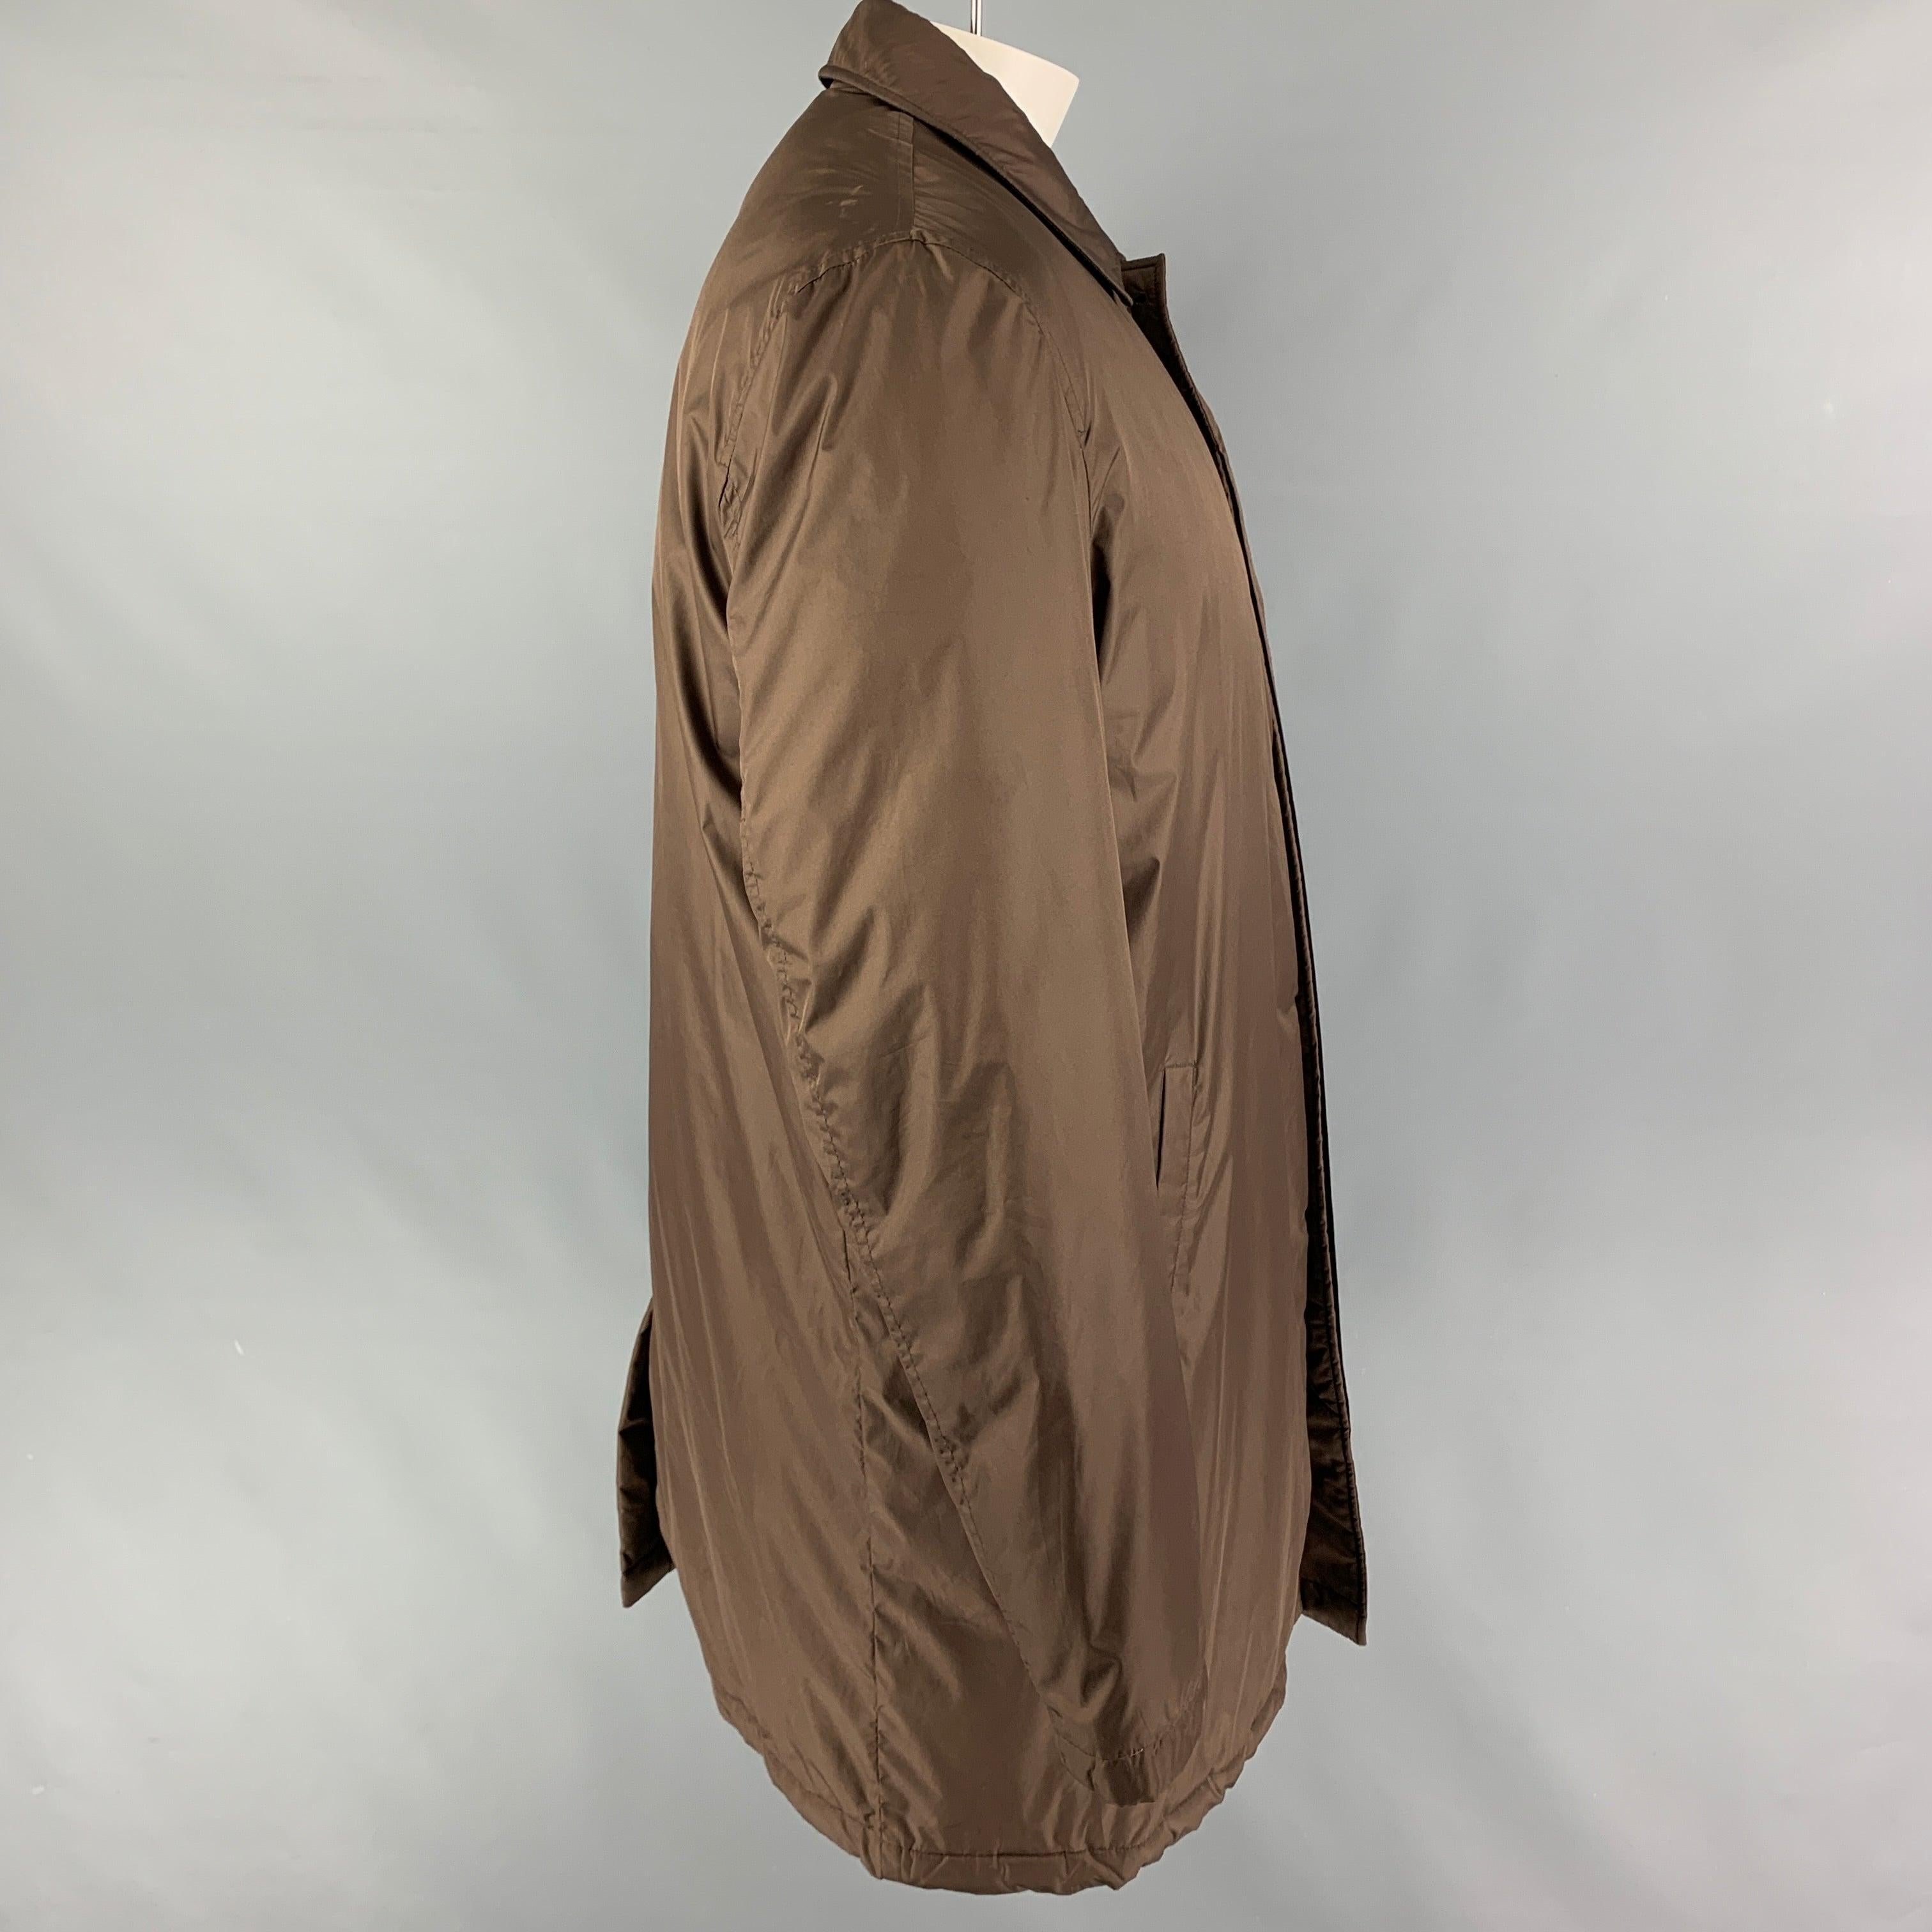 ETRO coat comes in a brown polyester / cotton with a stripe print liner featuring a spread collar, single back slit, and a hidden placket closure. Made in Italy.
Very Good
Pre-Owned Condition. 

Marked:  XL 

Measurements: 
 
Shoulder: 20 inches